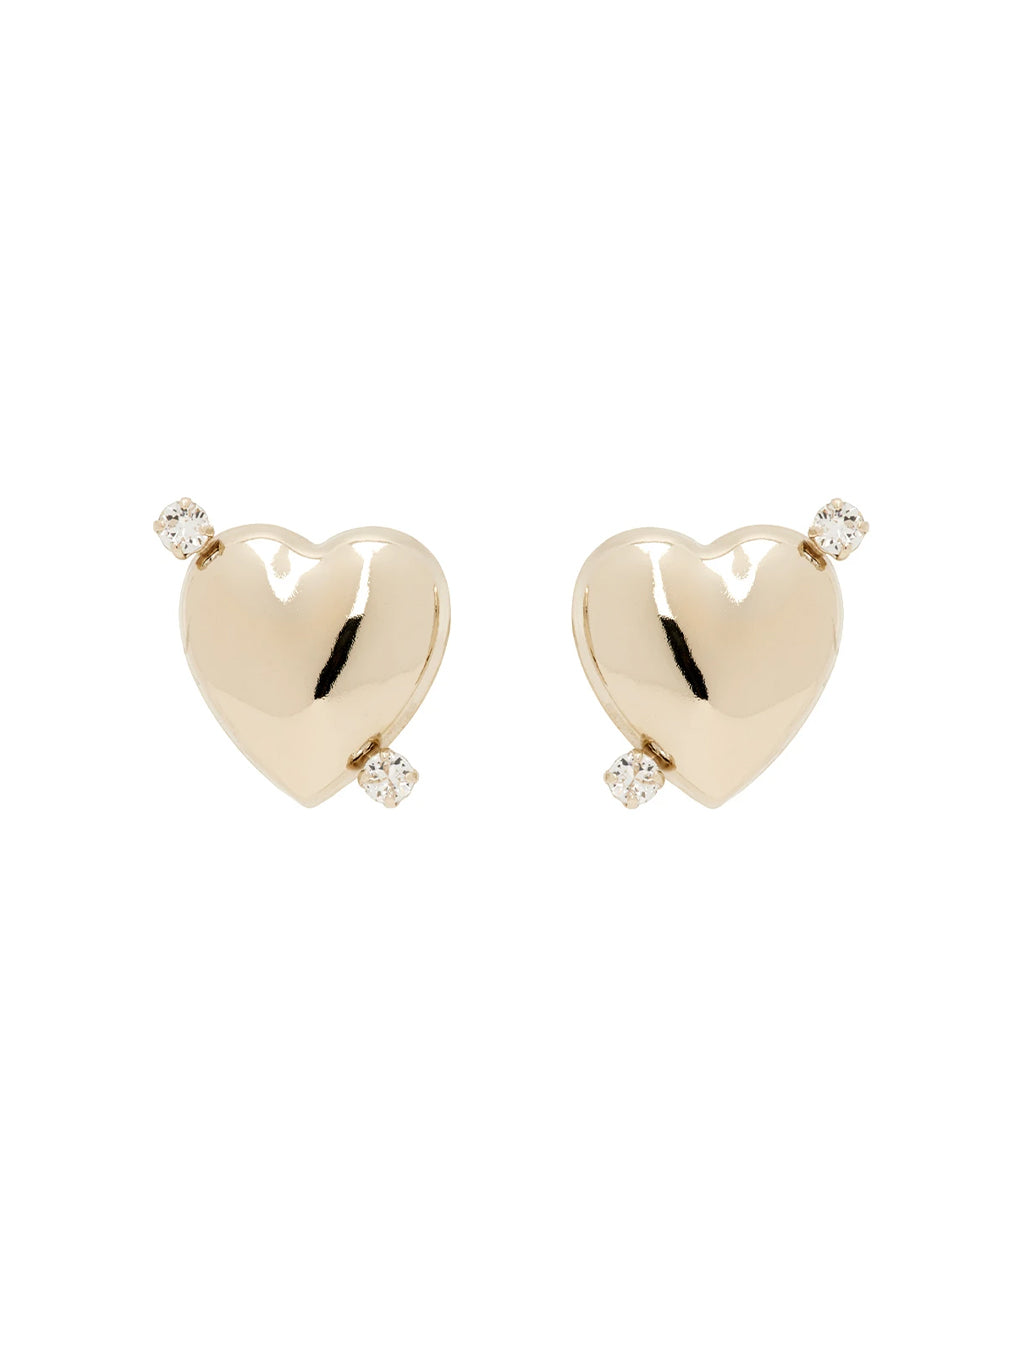 Justine Clenquet Juno Gold Earrings